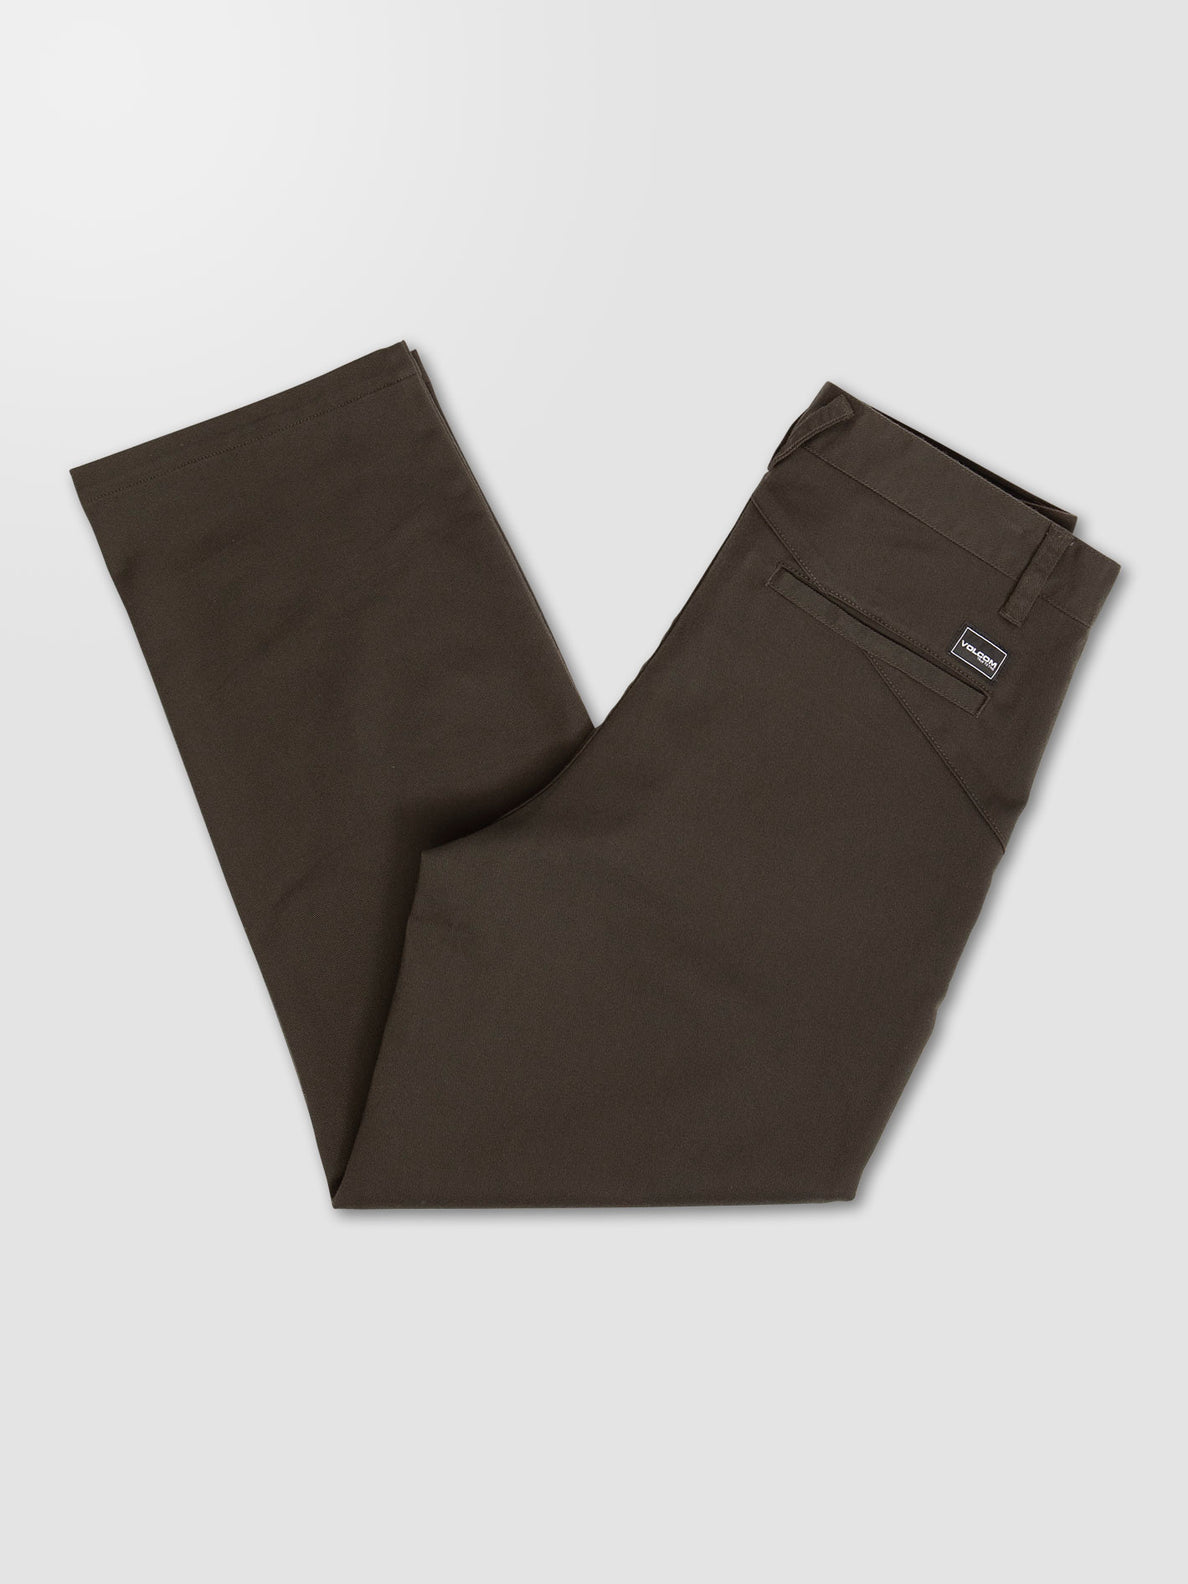 LOOSE TRUCK CHINO TROUSERS - RINSED BLACK